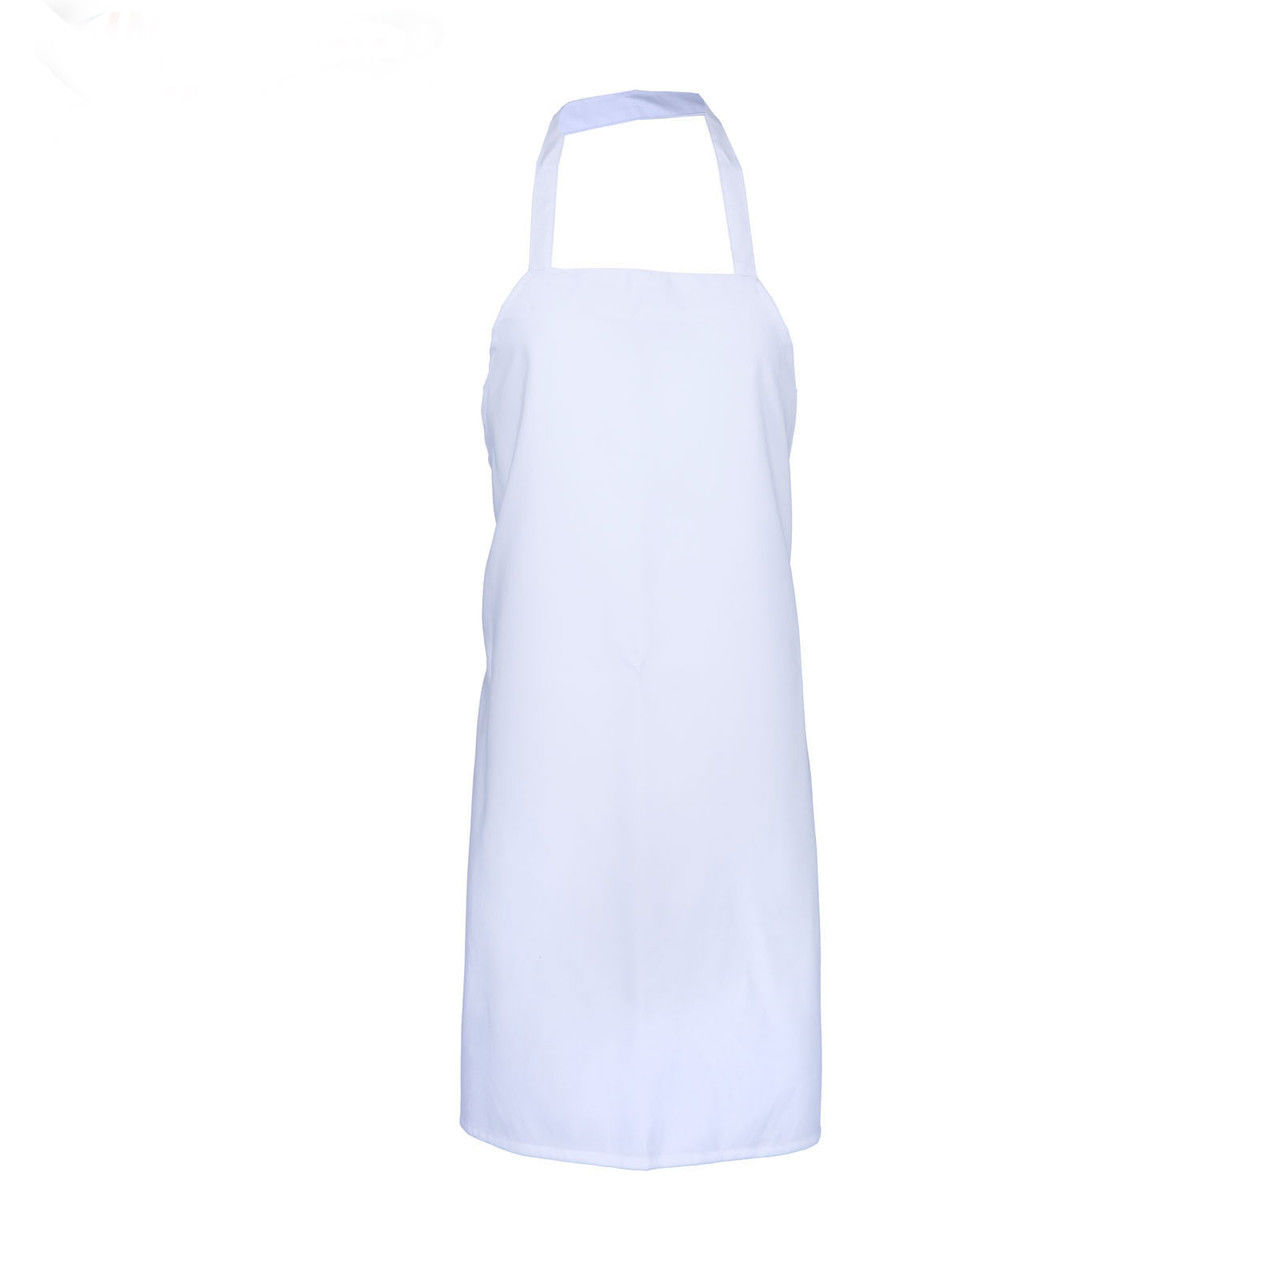 Does the Basic Bib Apron from Pinnacle Textiles have what type of ties?